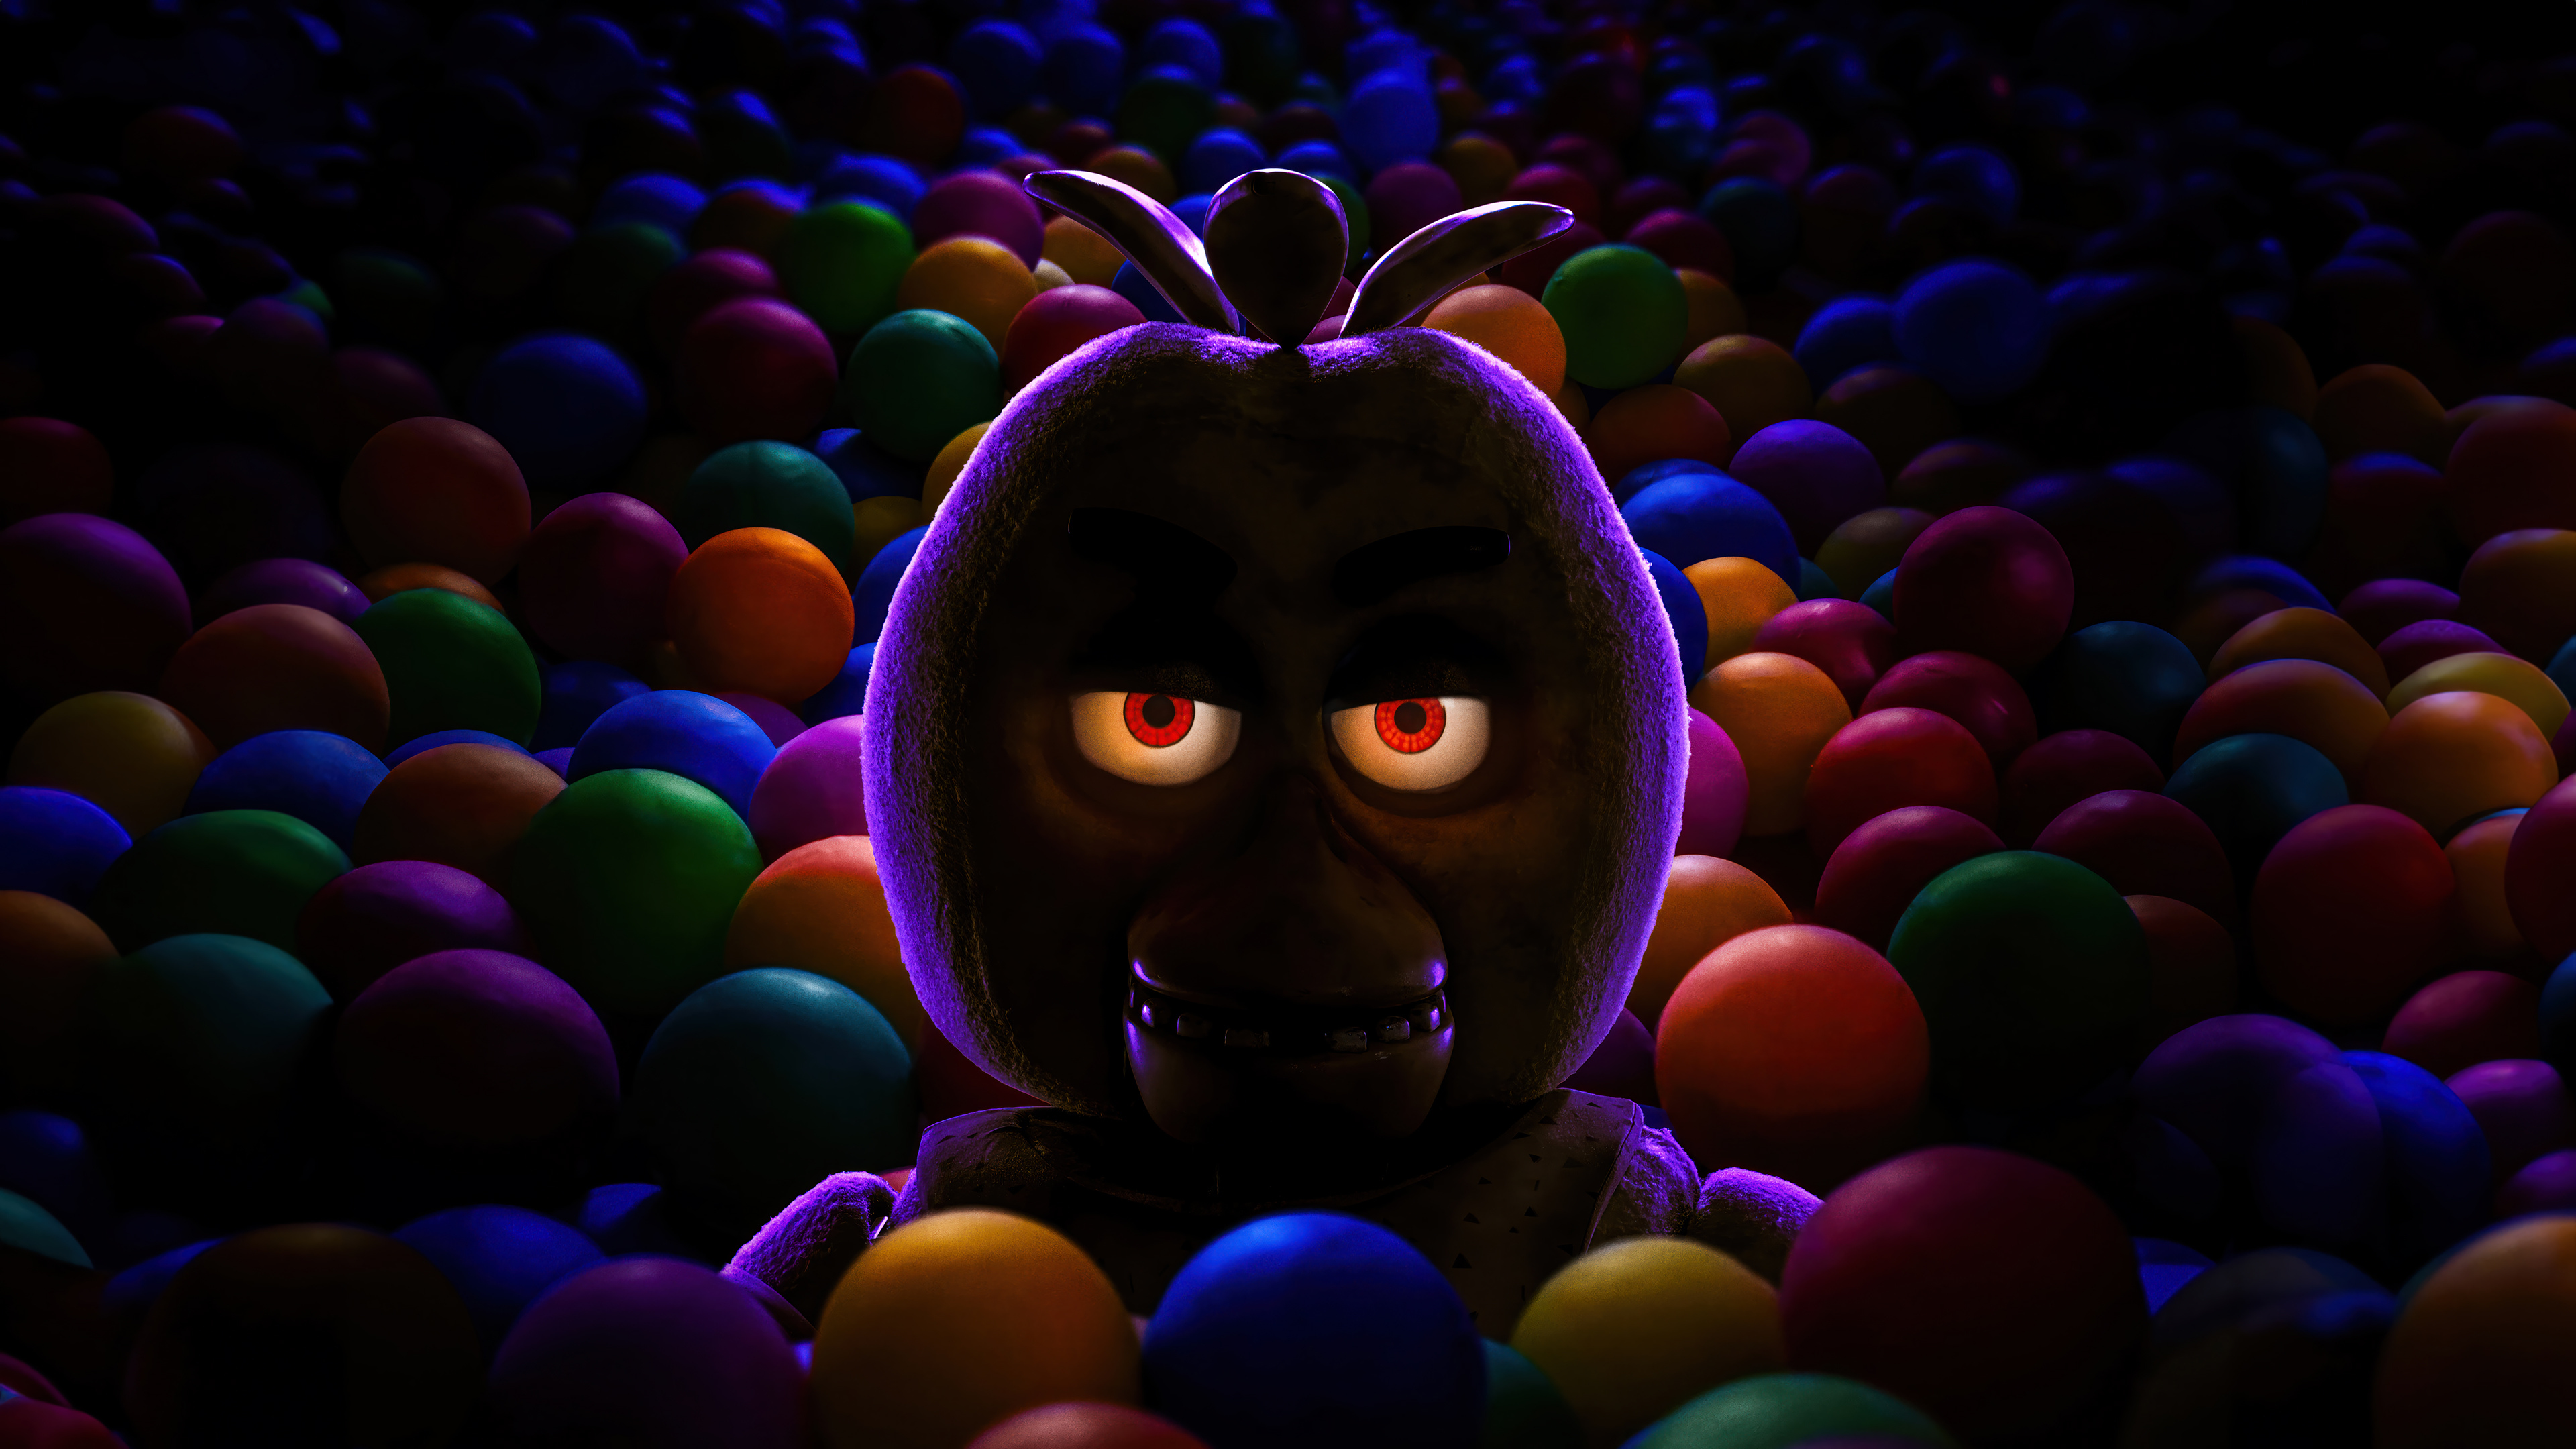 HD desktop wallpaper of Five Nights at Freddy's character emerging from colorful ball pit with sinister glowing eyes.